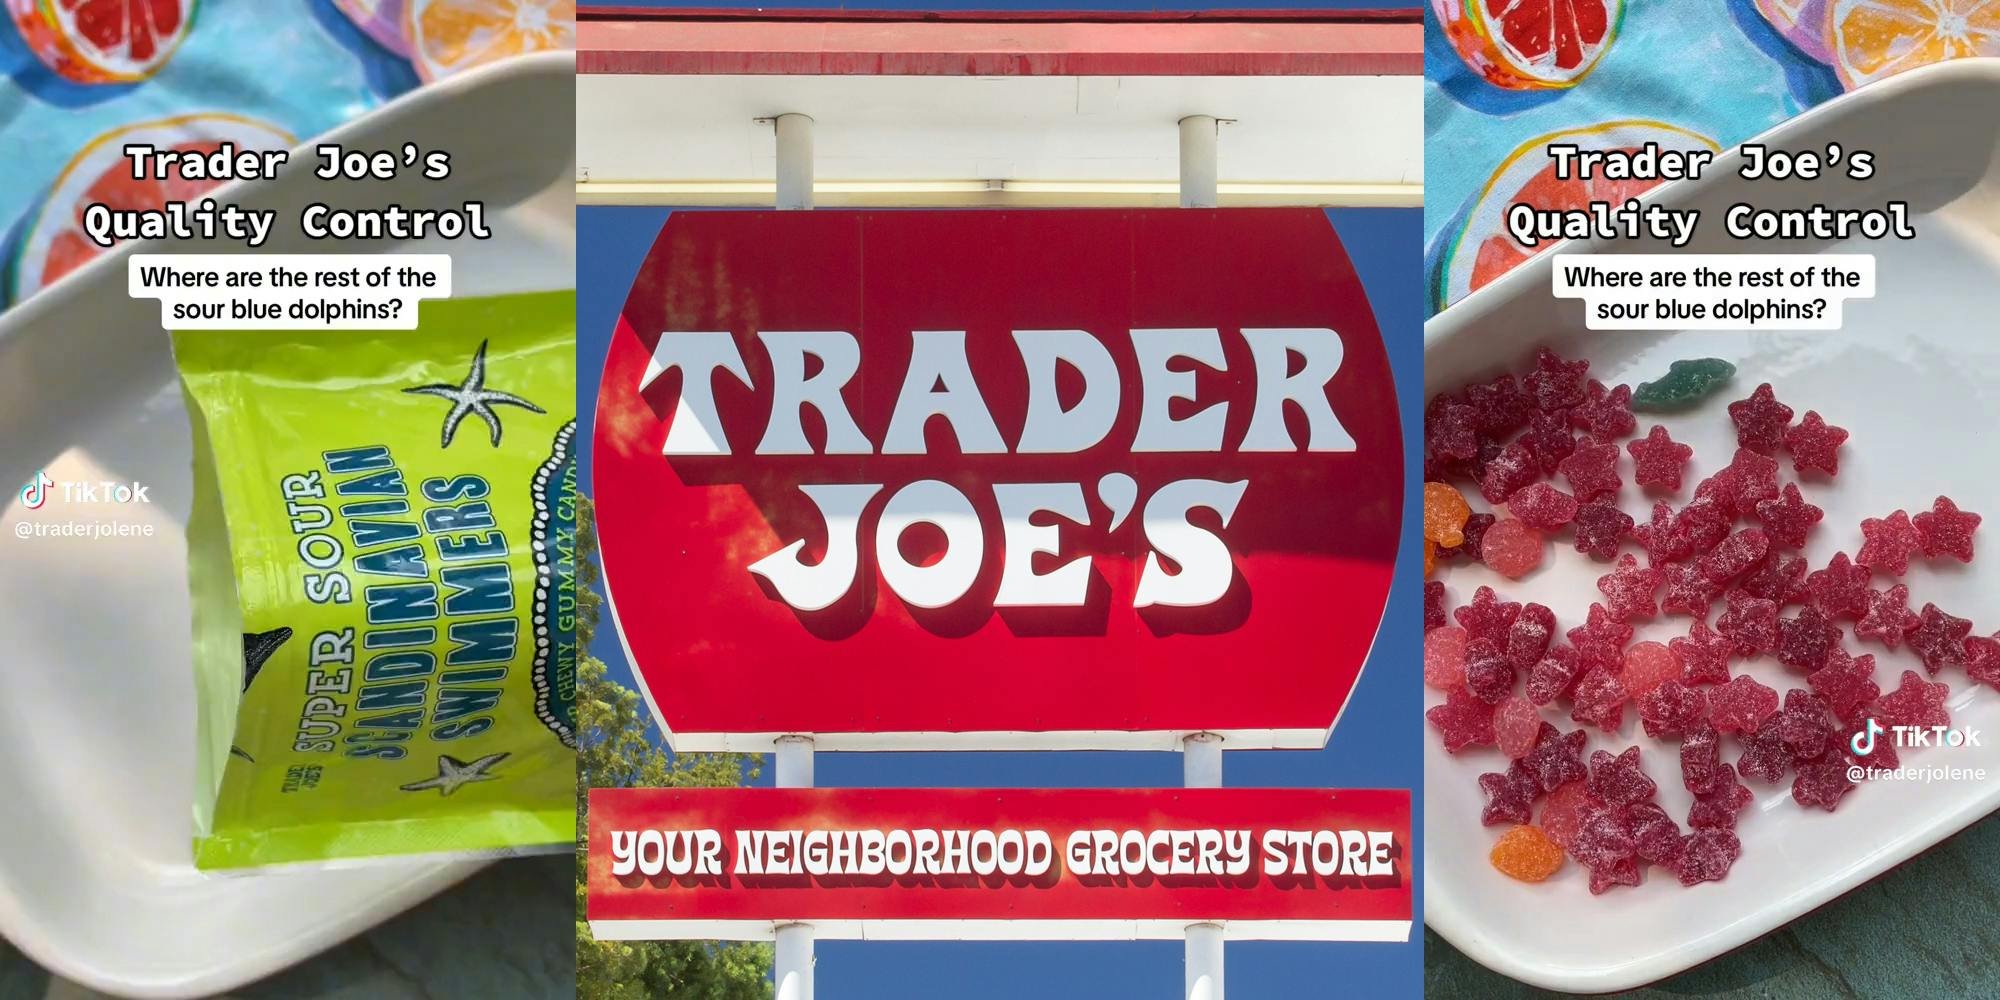 'They ALWAYS skimp on the best flavor': Customer gets package of Trader Joe's Scandinavian Swimmers with only 1 blue dolphin